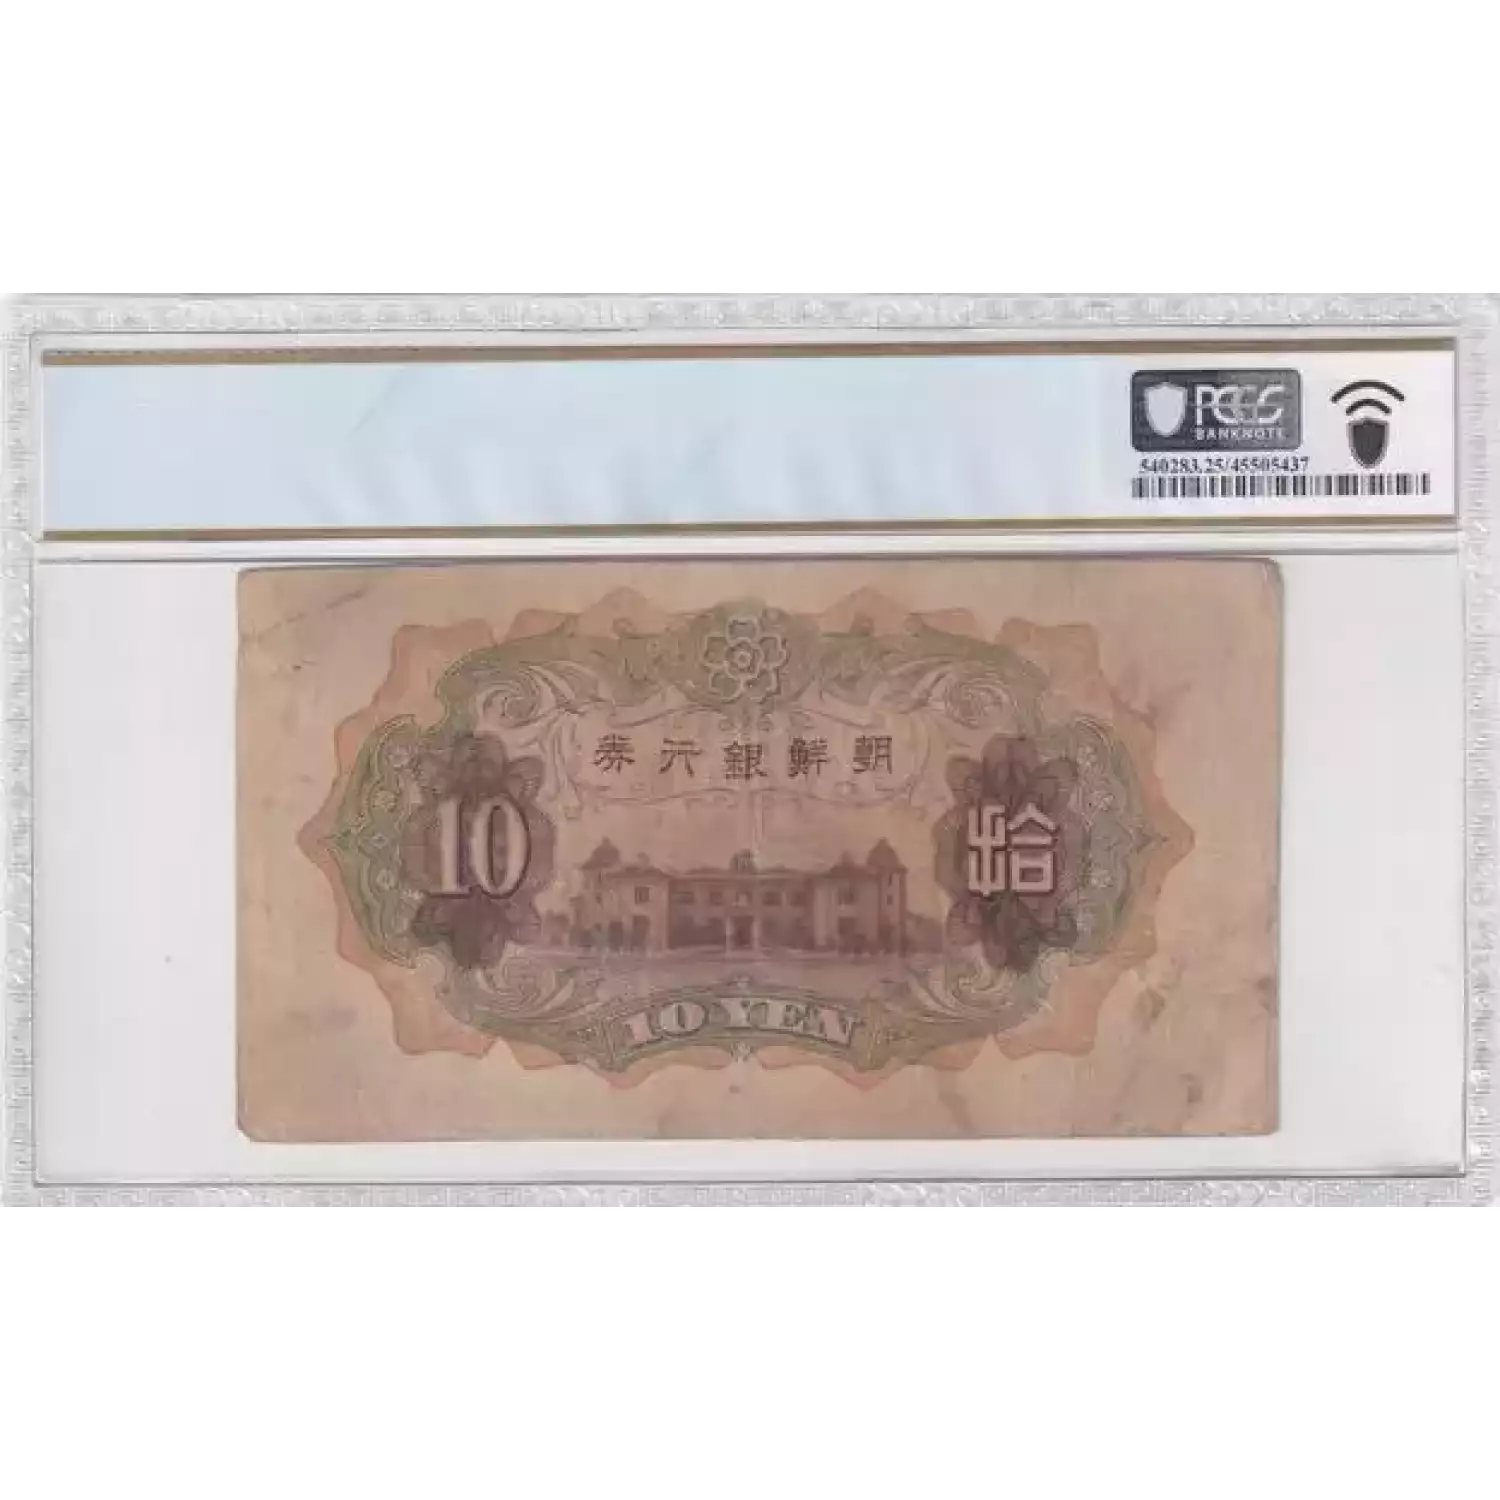 10 Yen ND (1932), 1932-1938 ND and Dated Issue a. Issued note Korea 31